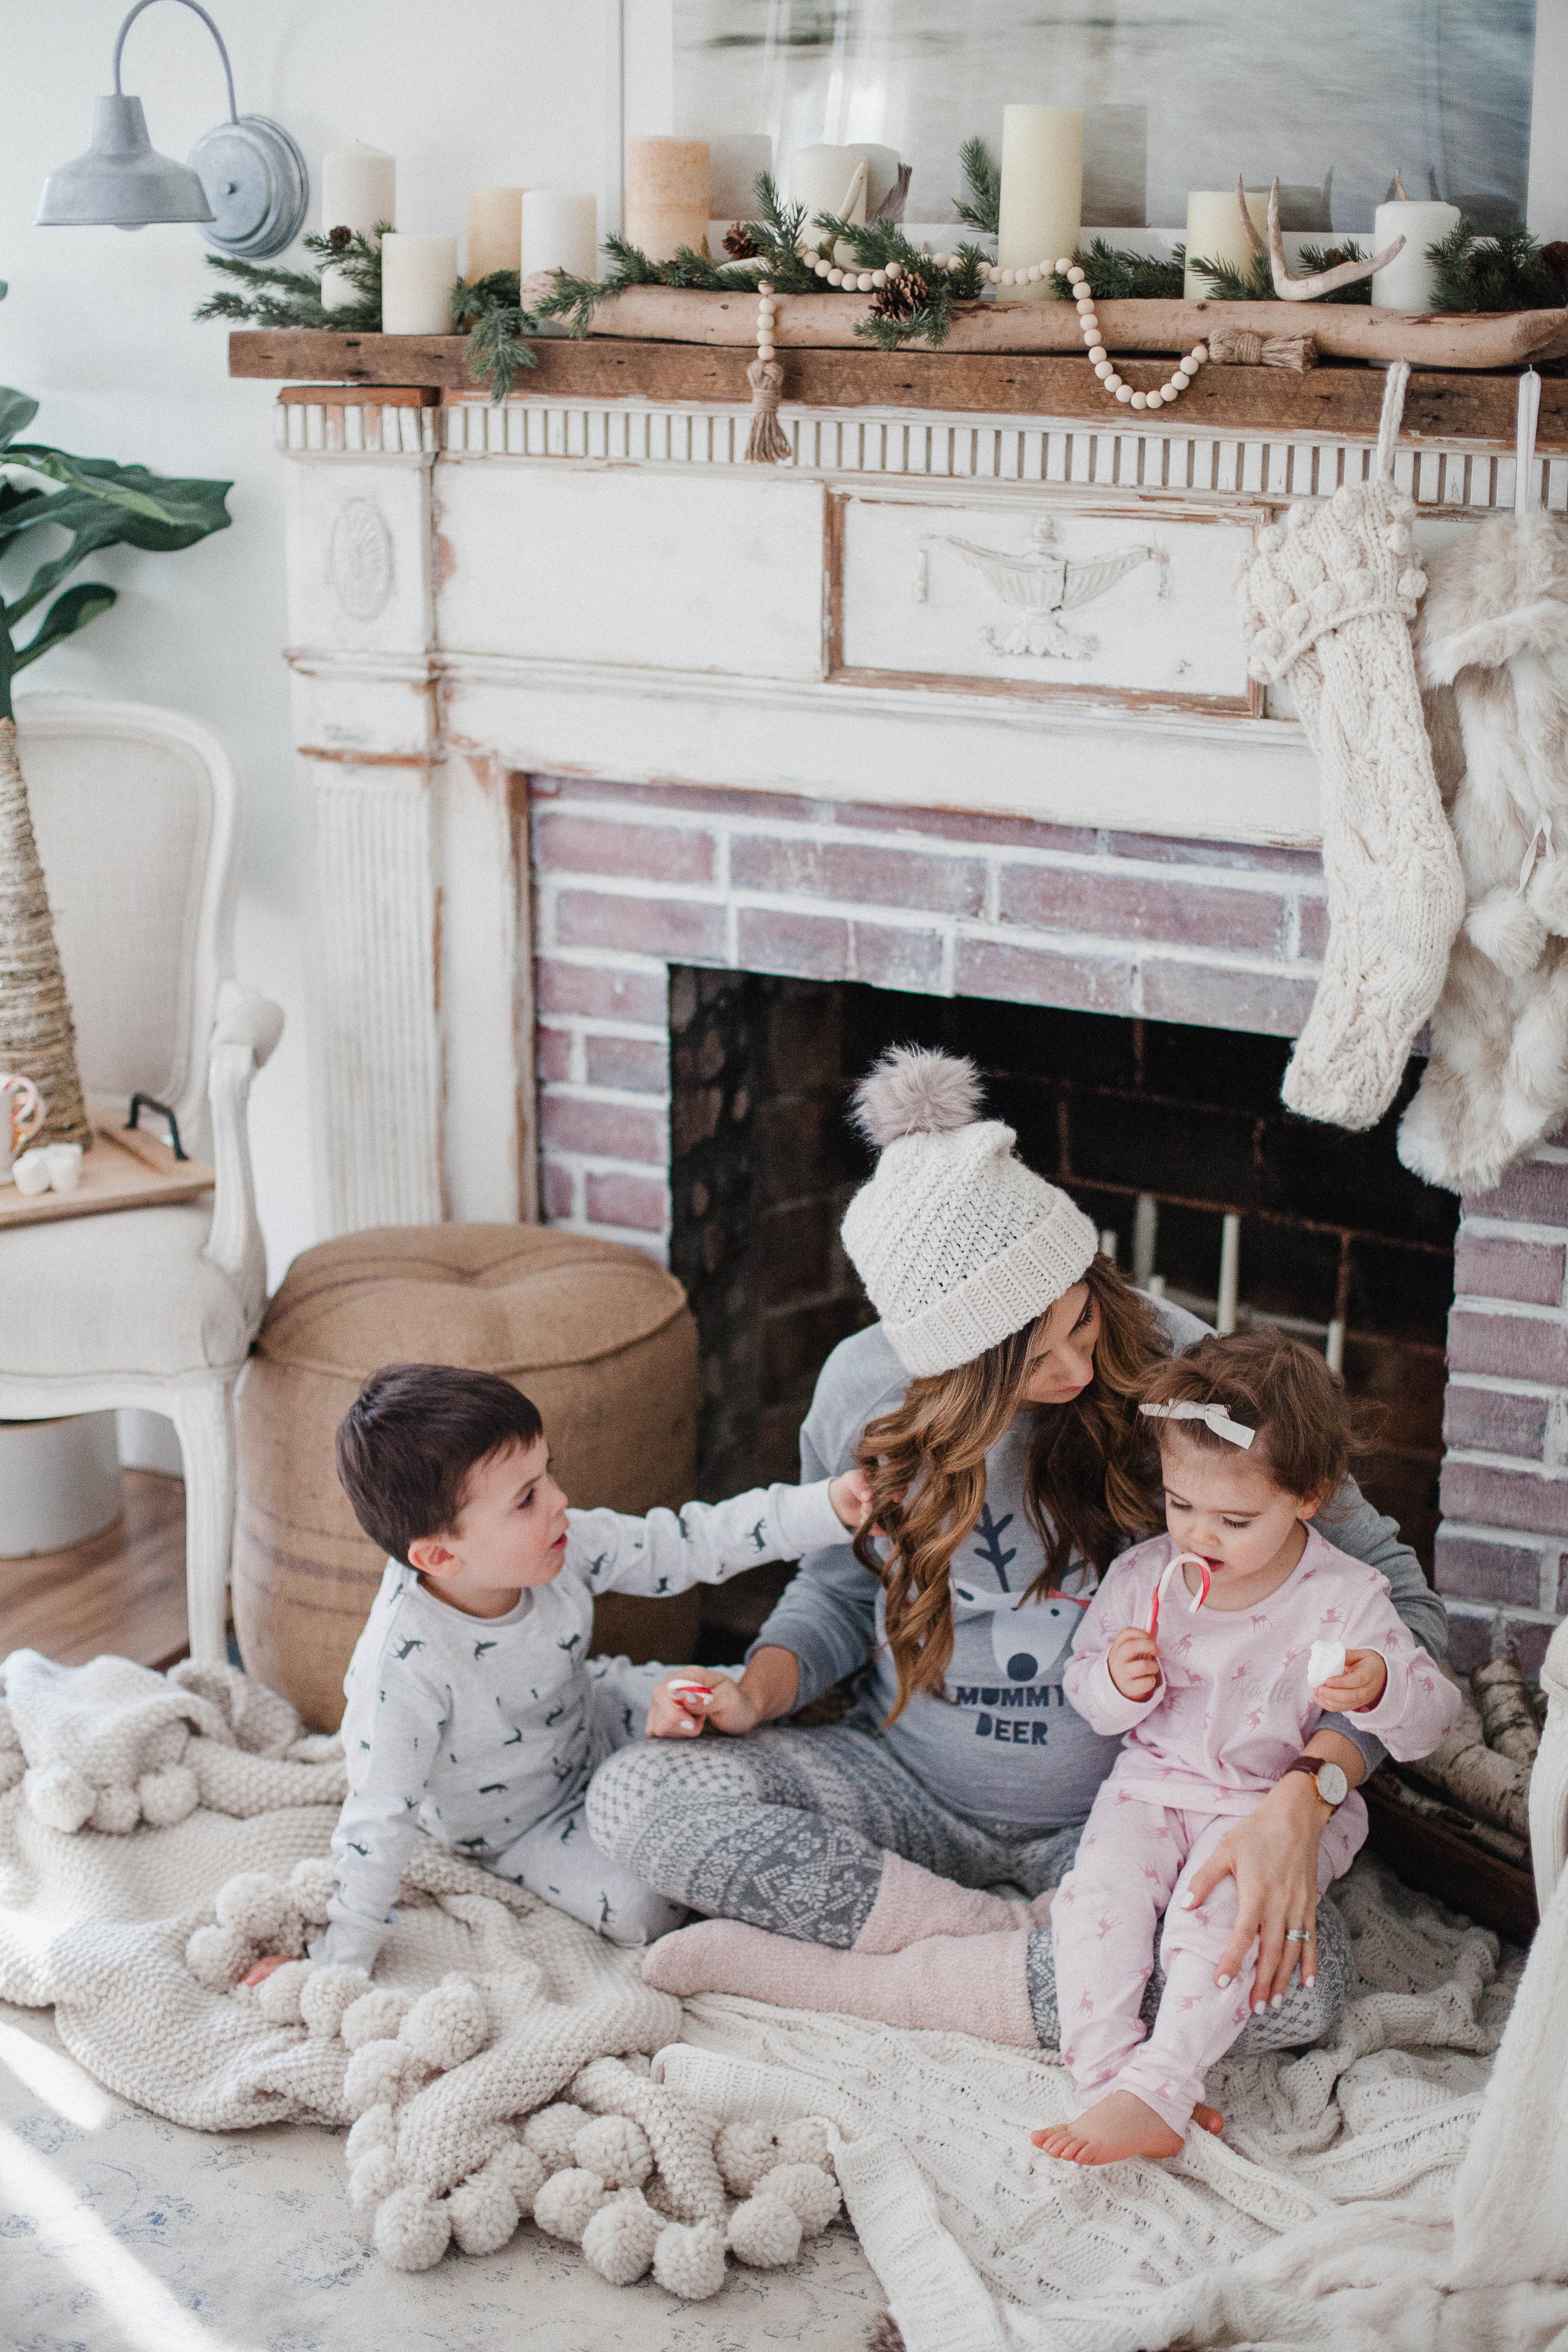 Life & style blogger Lauren McBride shares the perfect way to gift "The Magic of Family Time" this holiday season with personalized gifts from My 1st Years.